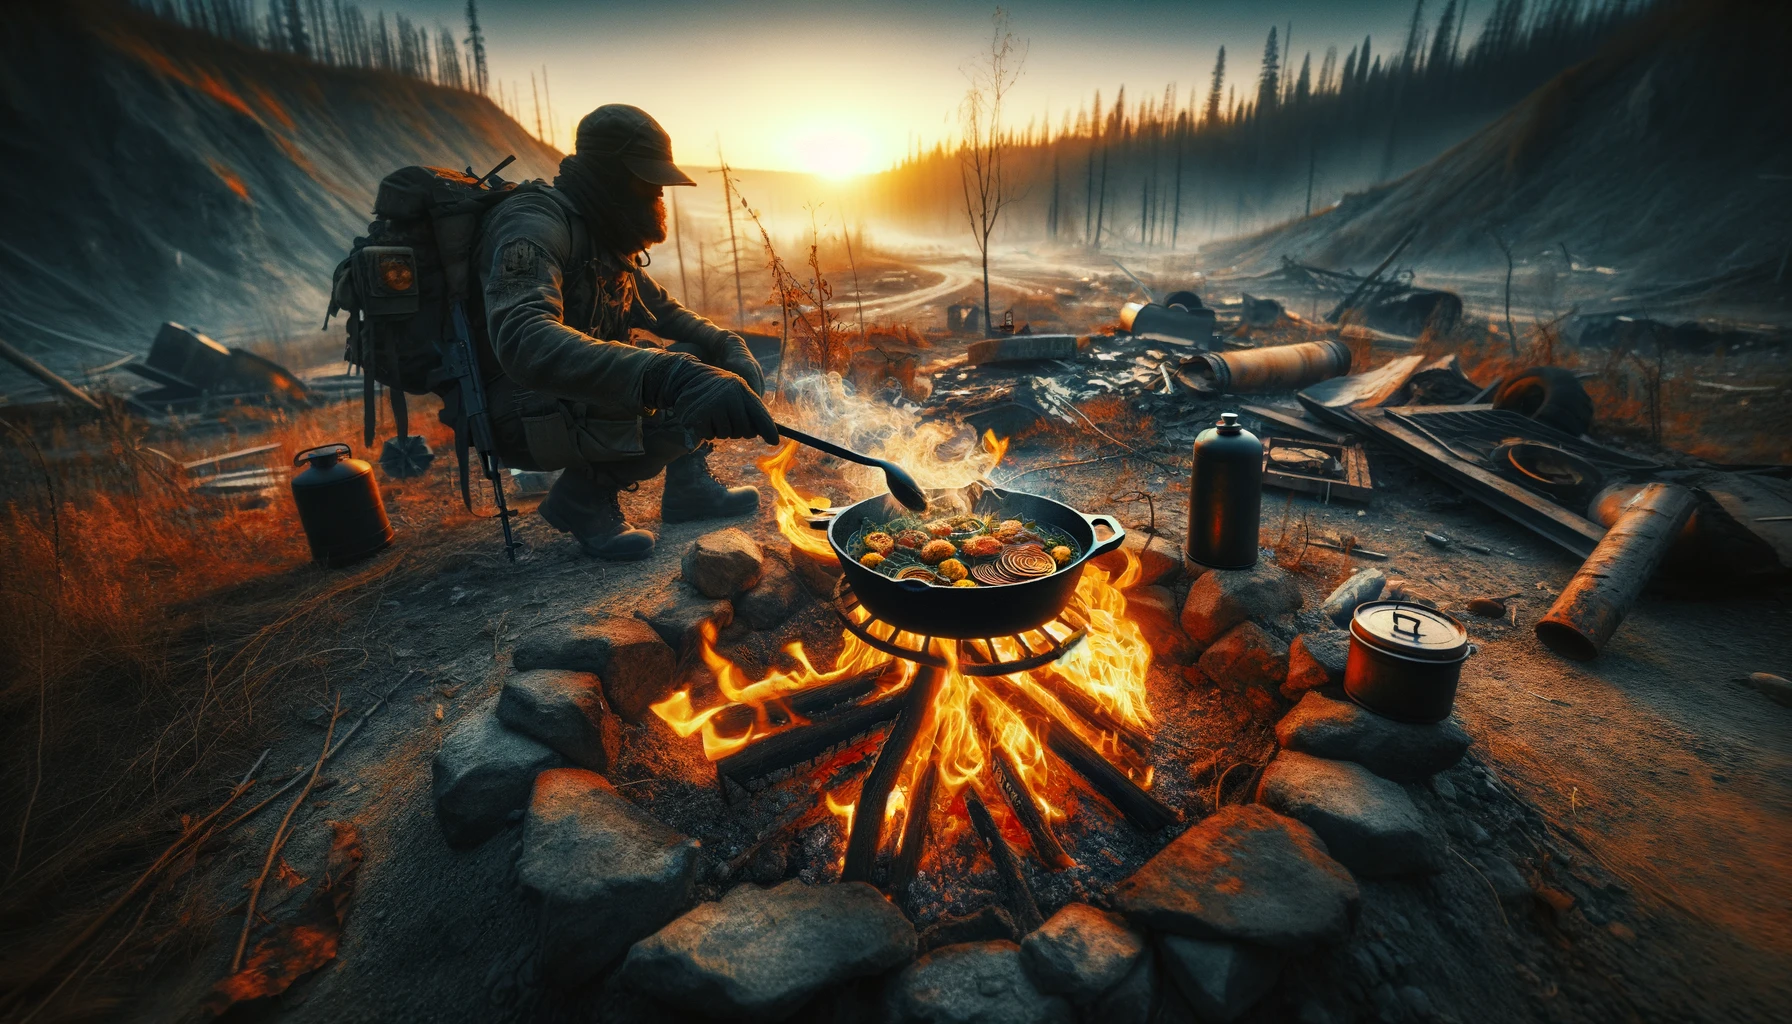 Post-apocalyptic wilderness scene with a heavy-duty cast iron skillet over an open flame, showcasing a prepper skillfully cooking a hearty meal amidst nature's regrowth and the remnants of civilization, under the soft golden light of dusk